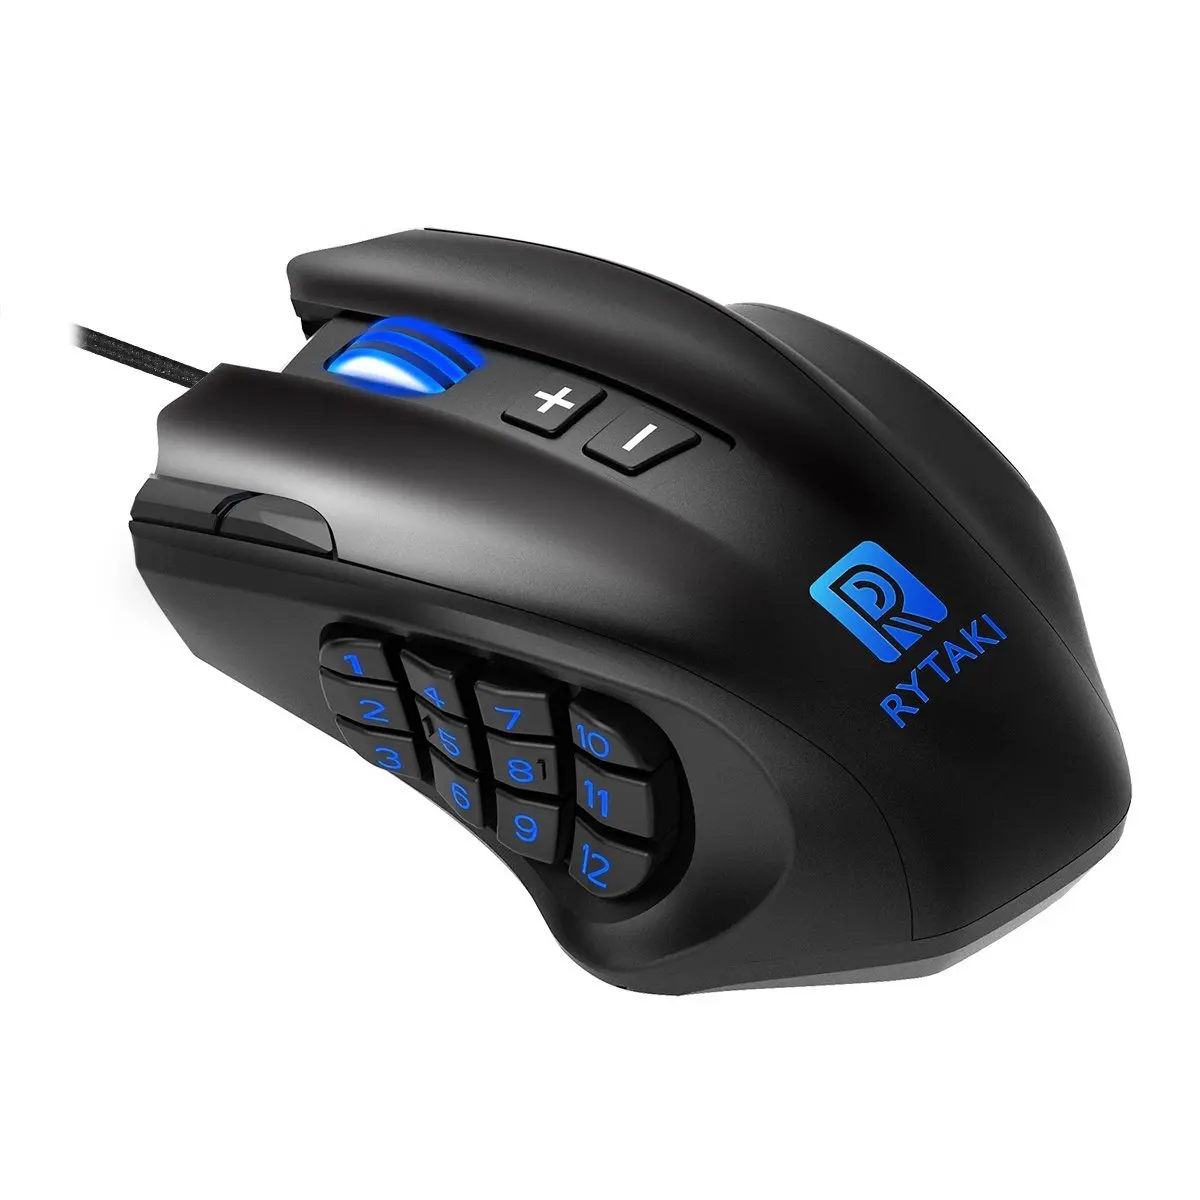 High-Precision 16400 DPI Laser MMO Wired Gaming Mice with 19 Programmable Buttons, 12 Side Buttons,6 Adjustable DPI Levels